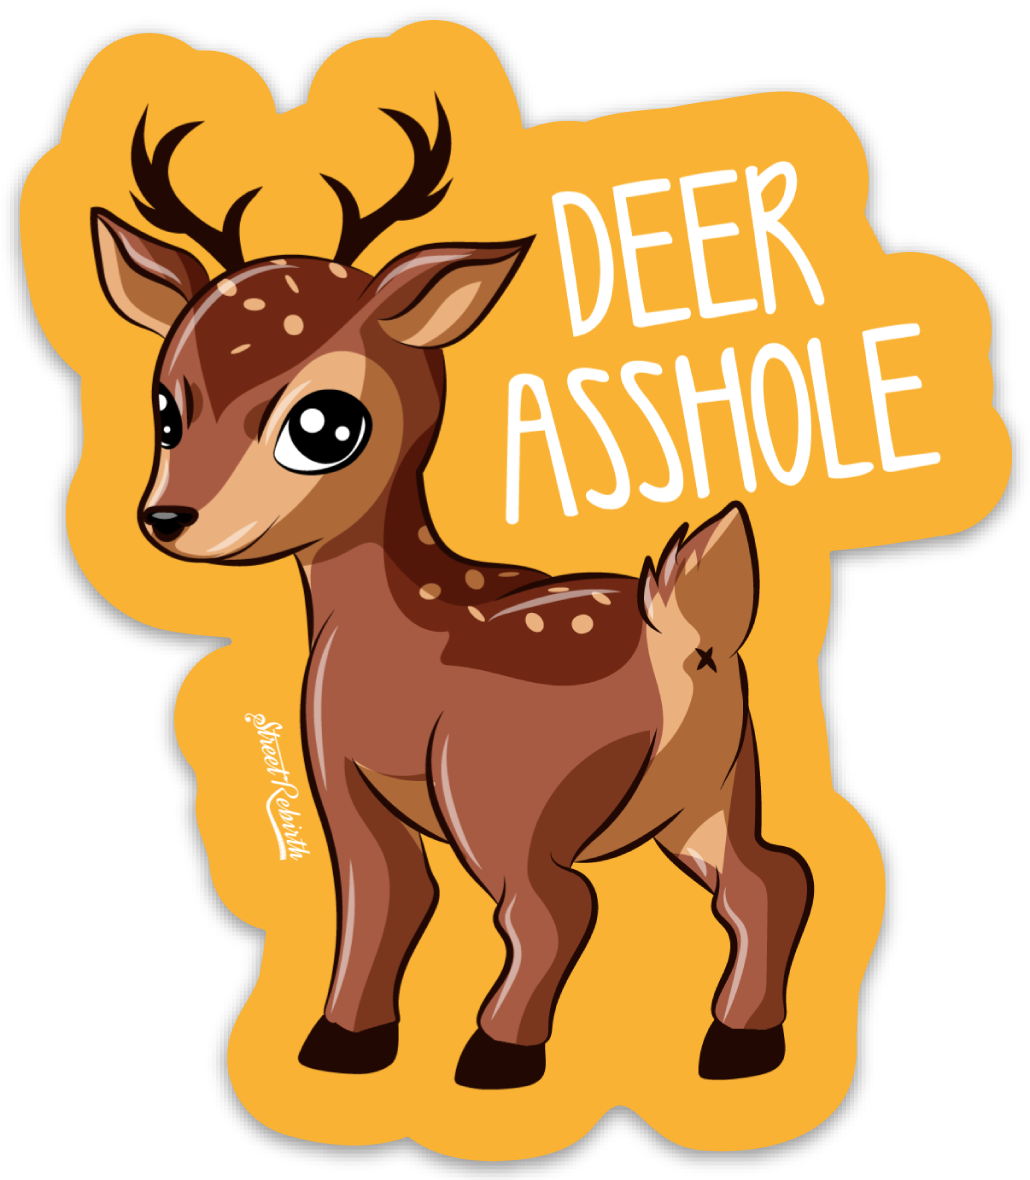 Deer Asshole PUN STICKER – ONE 4 INCH WATER PROOF VINYL STICKER – FOR HYDRO FLASK, SKATEBOARD, LAPTOP, PLANNER, CAR, COLLECTING, GIFTING